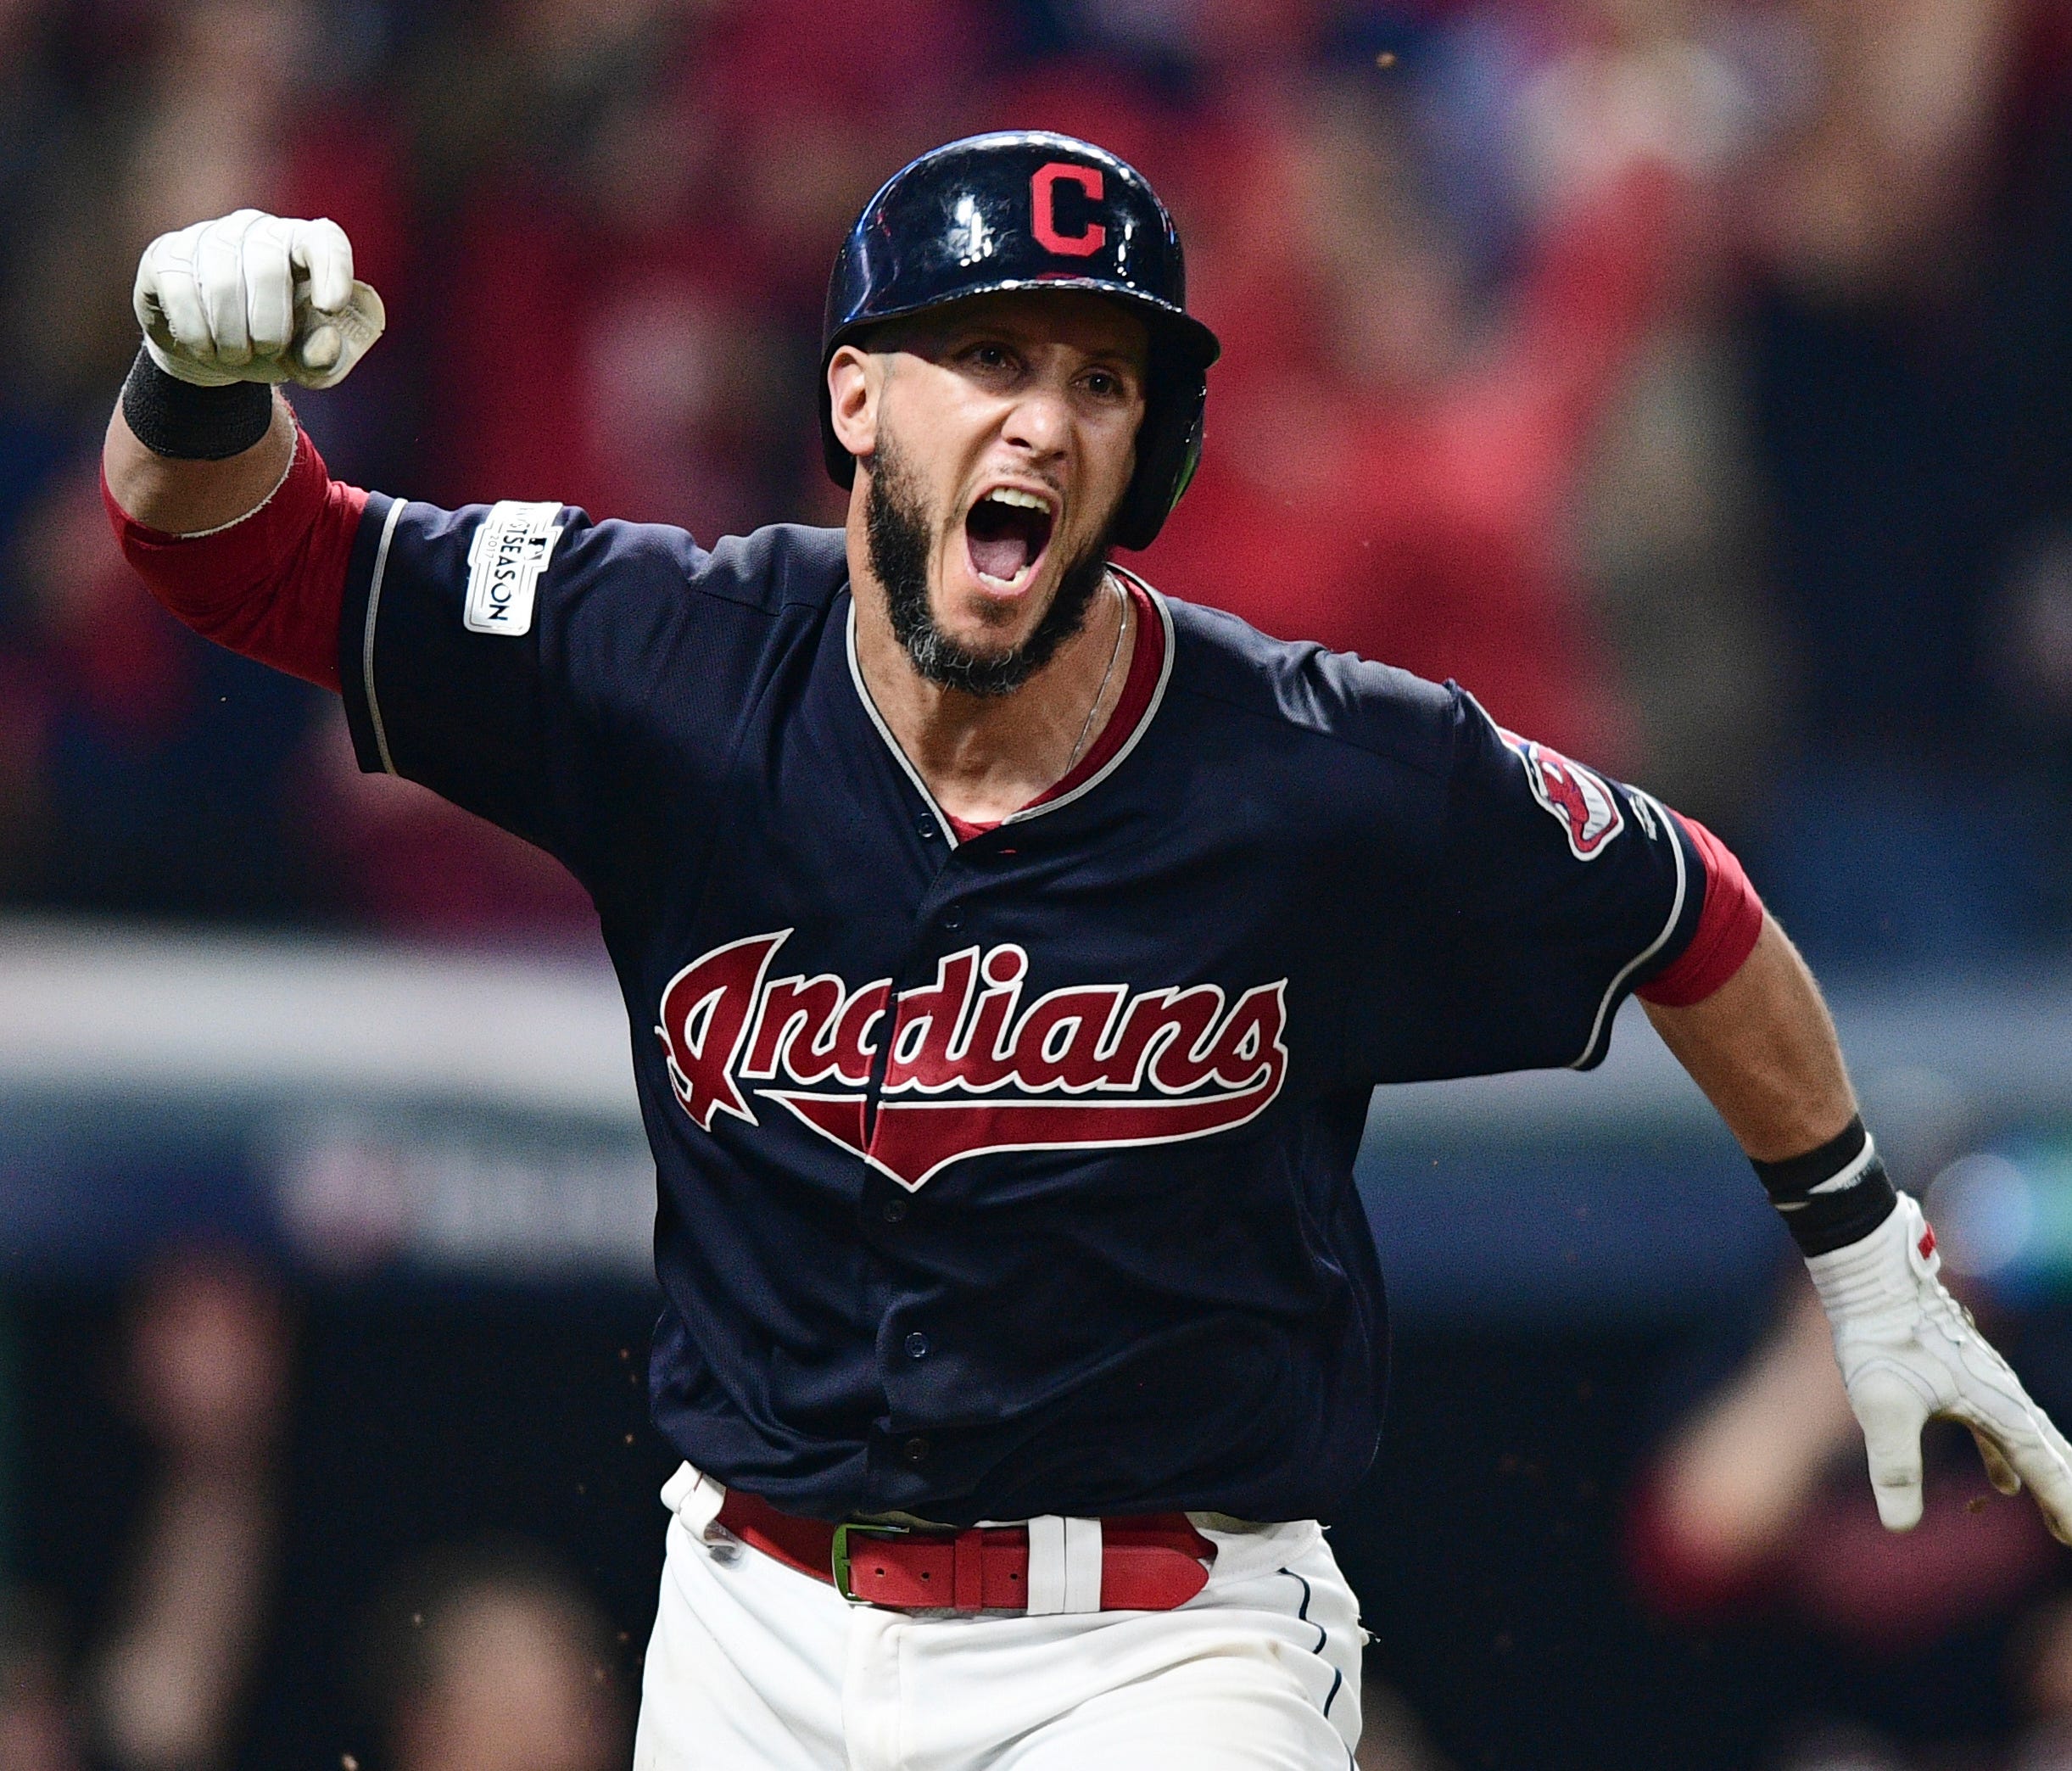 Indians' Yan Gomes celebrates after hitting a game-winning single in the 13th inning.